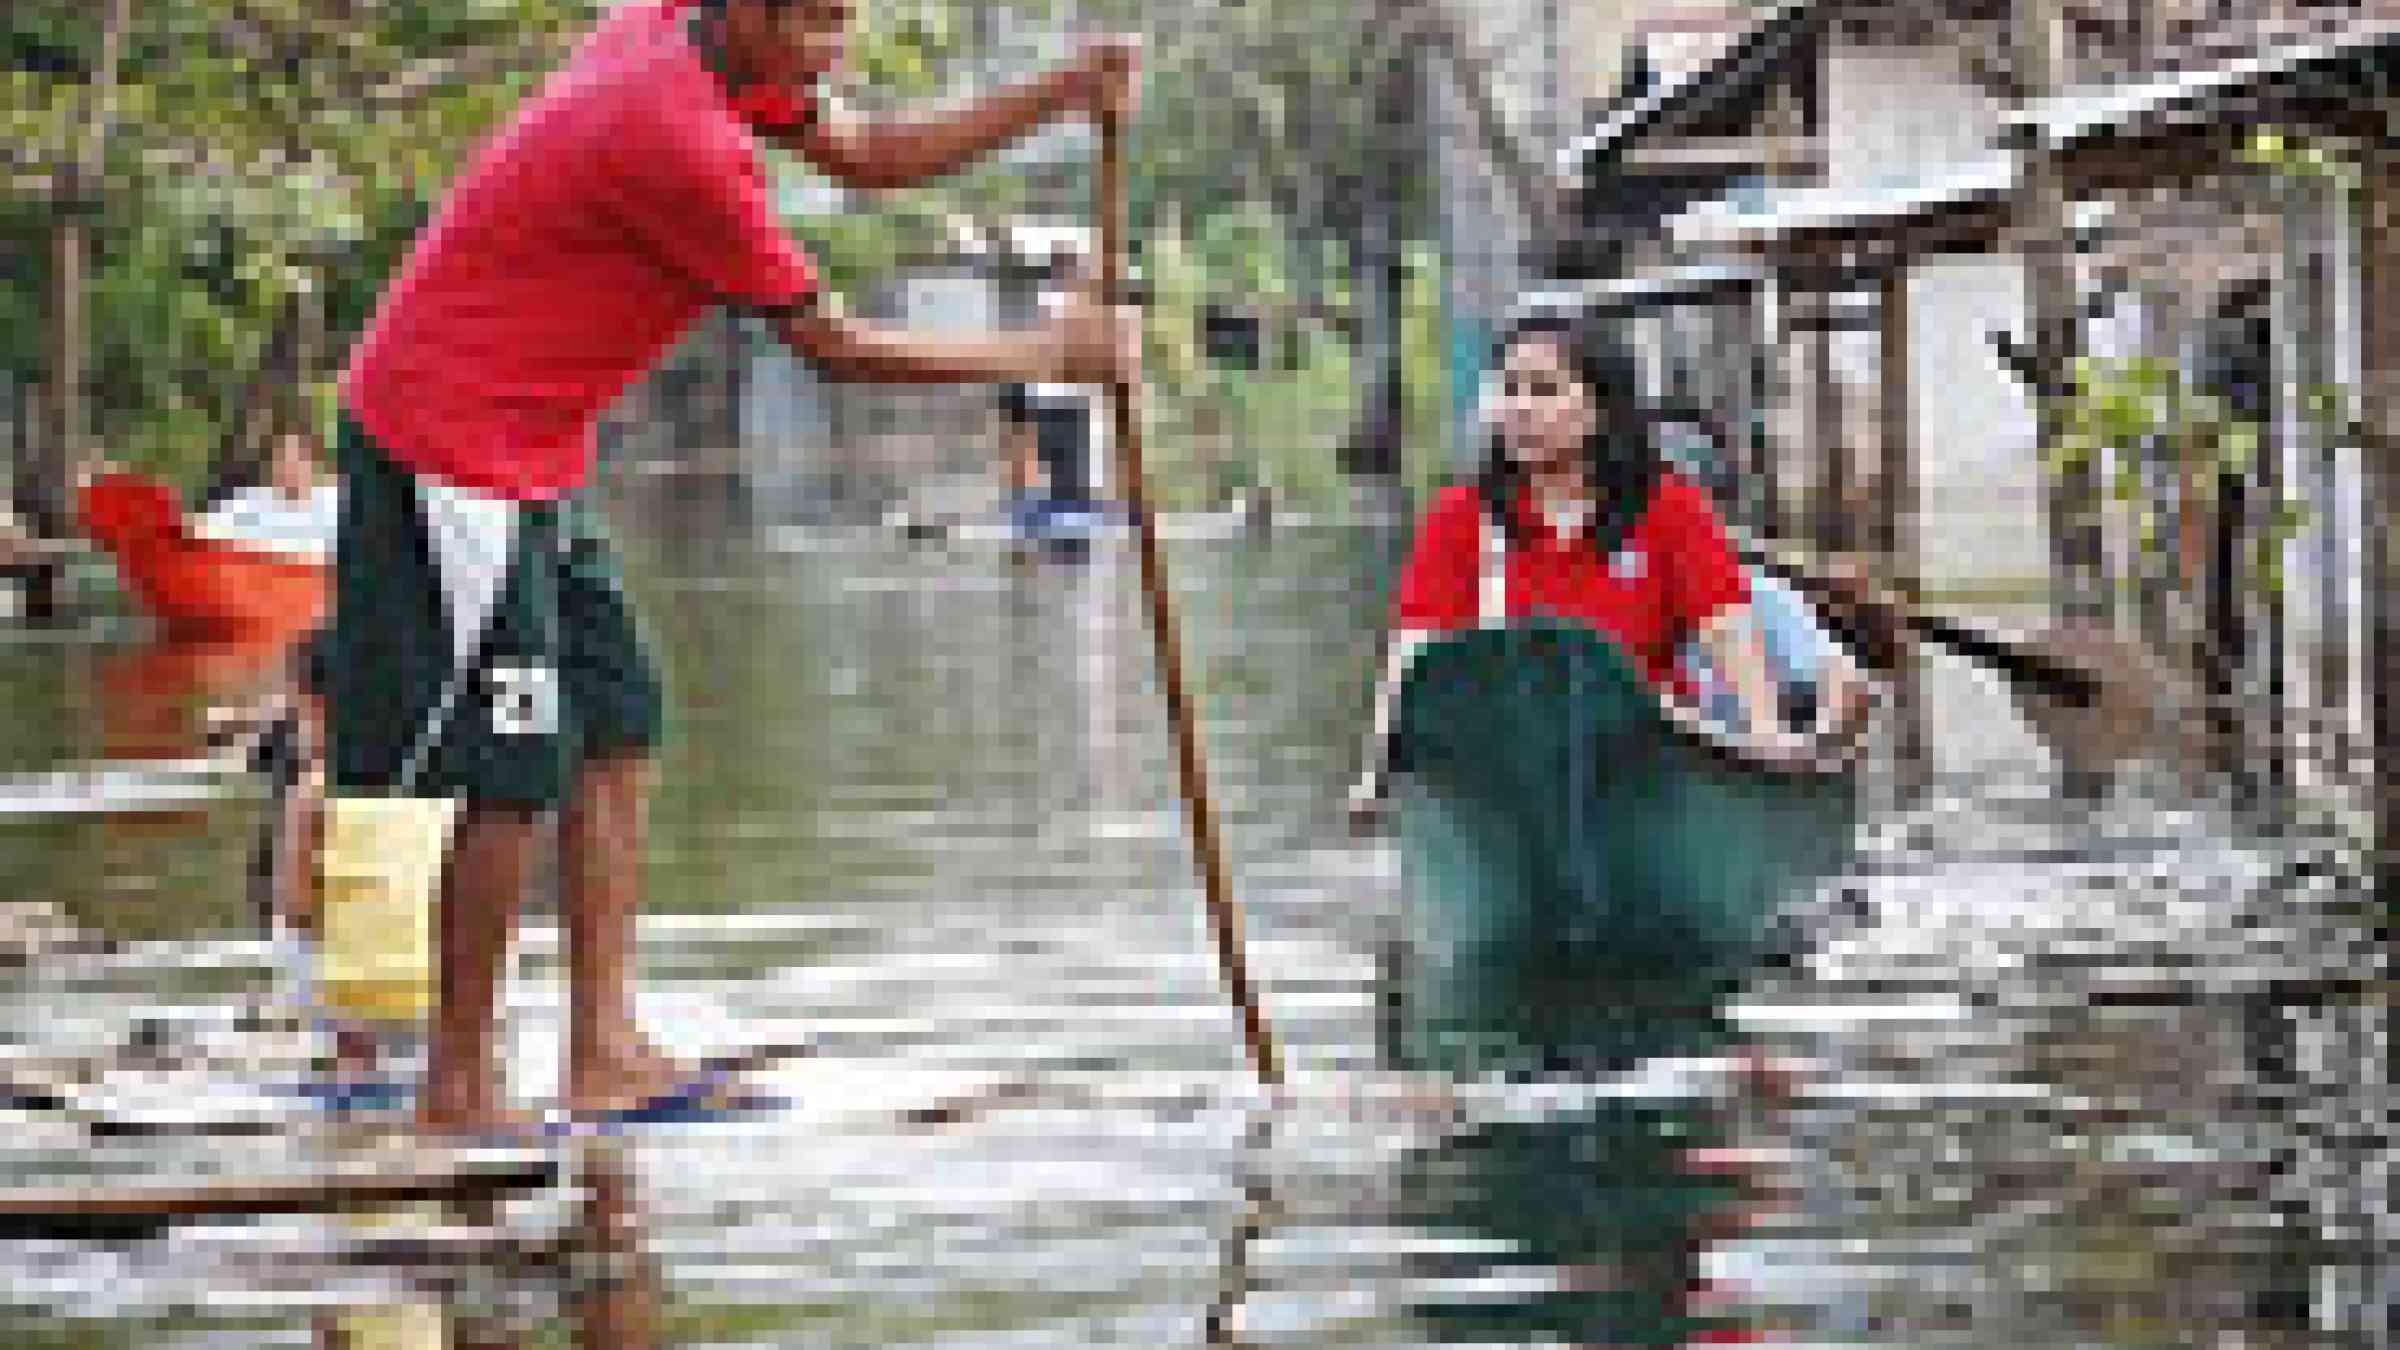 Philippines flood, 2009 by IFRC, flickr, creative commons Attribution-NonCommercial-NoDerivs 2.0 Generic, http://www.flickr.com/photos/ifrc/4244867964